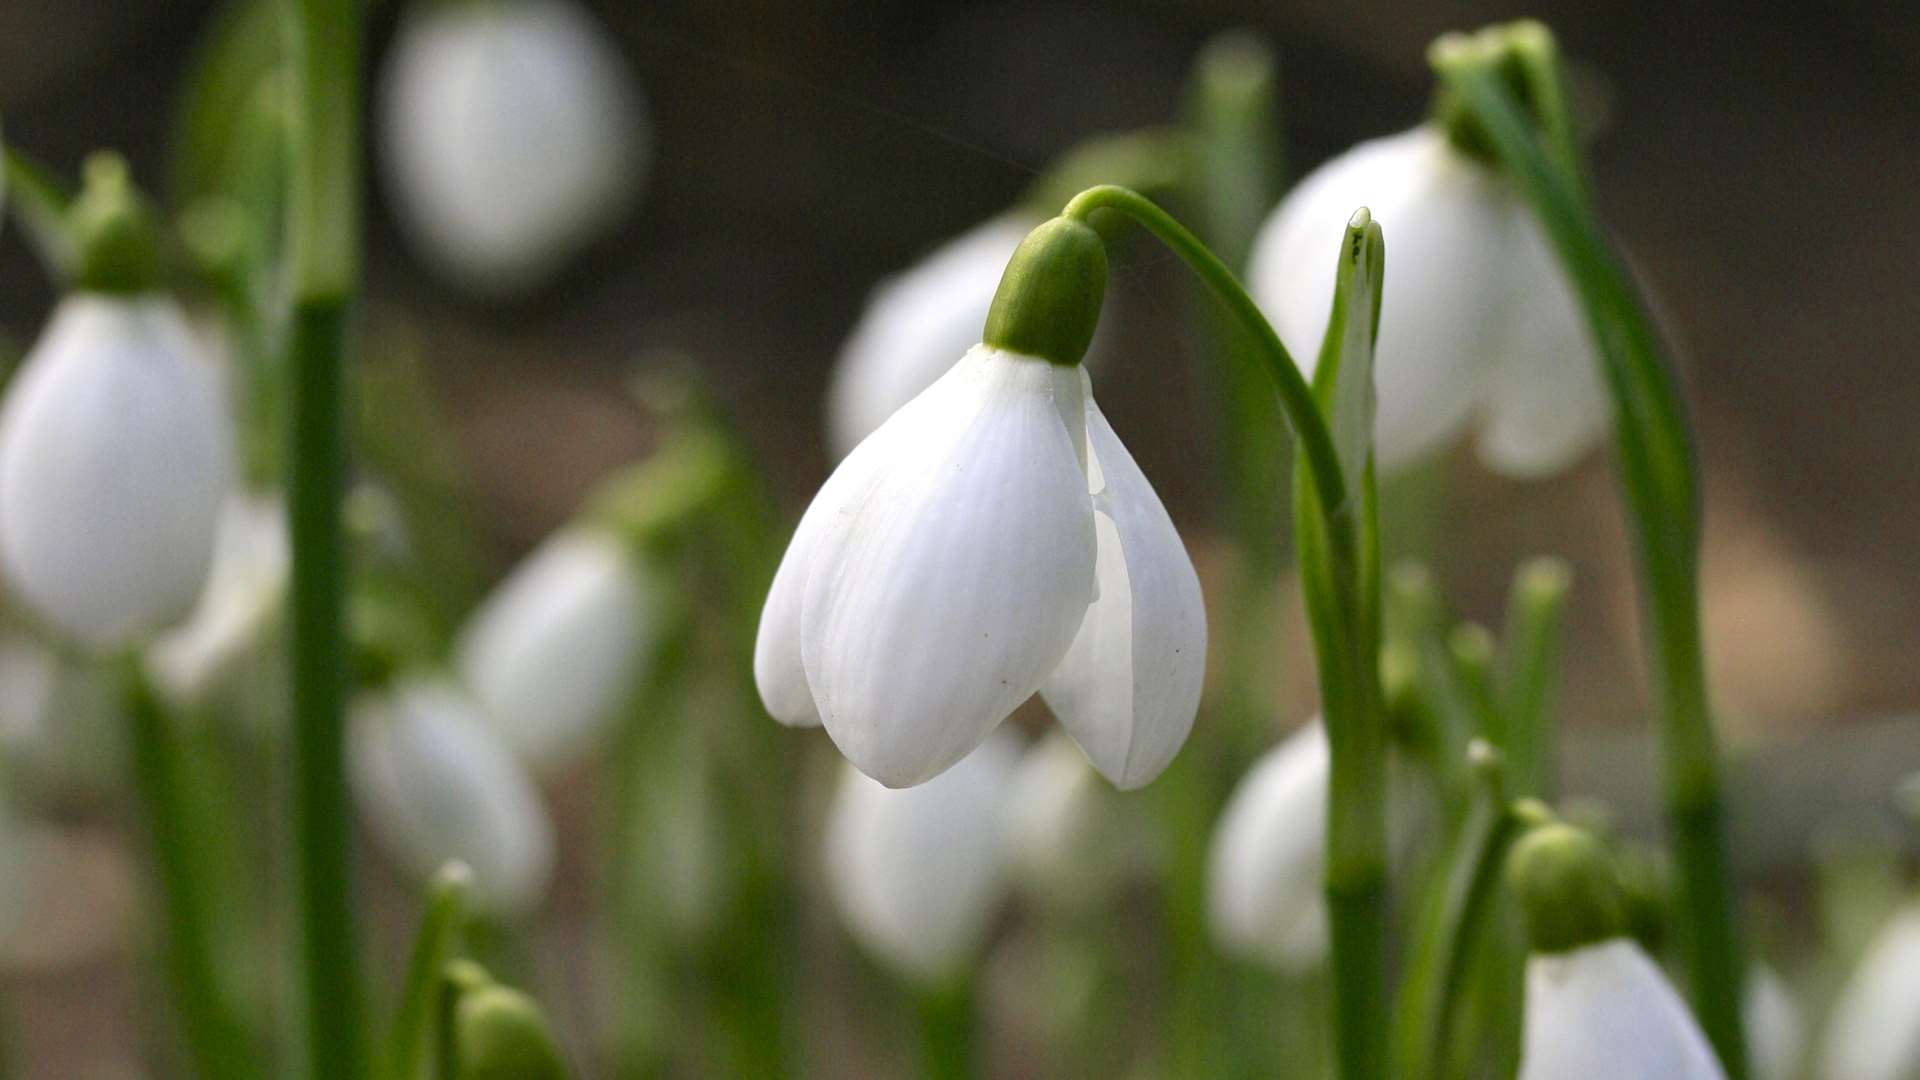 The snowdrops should be sensational this weekend